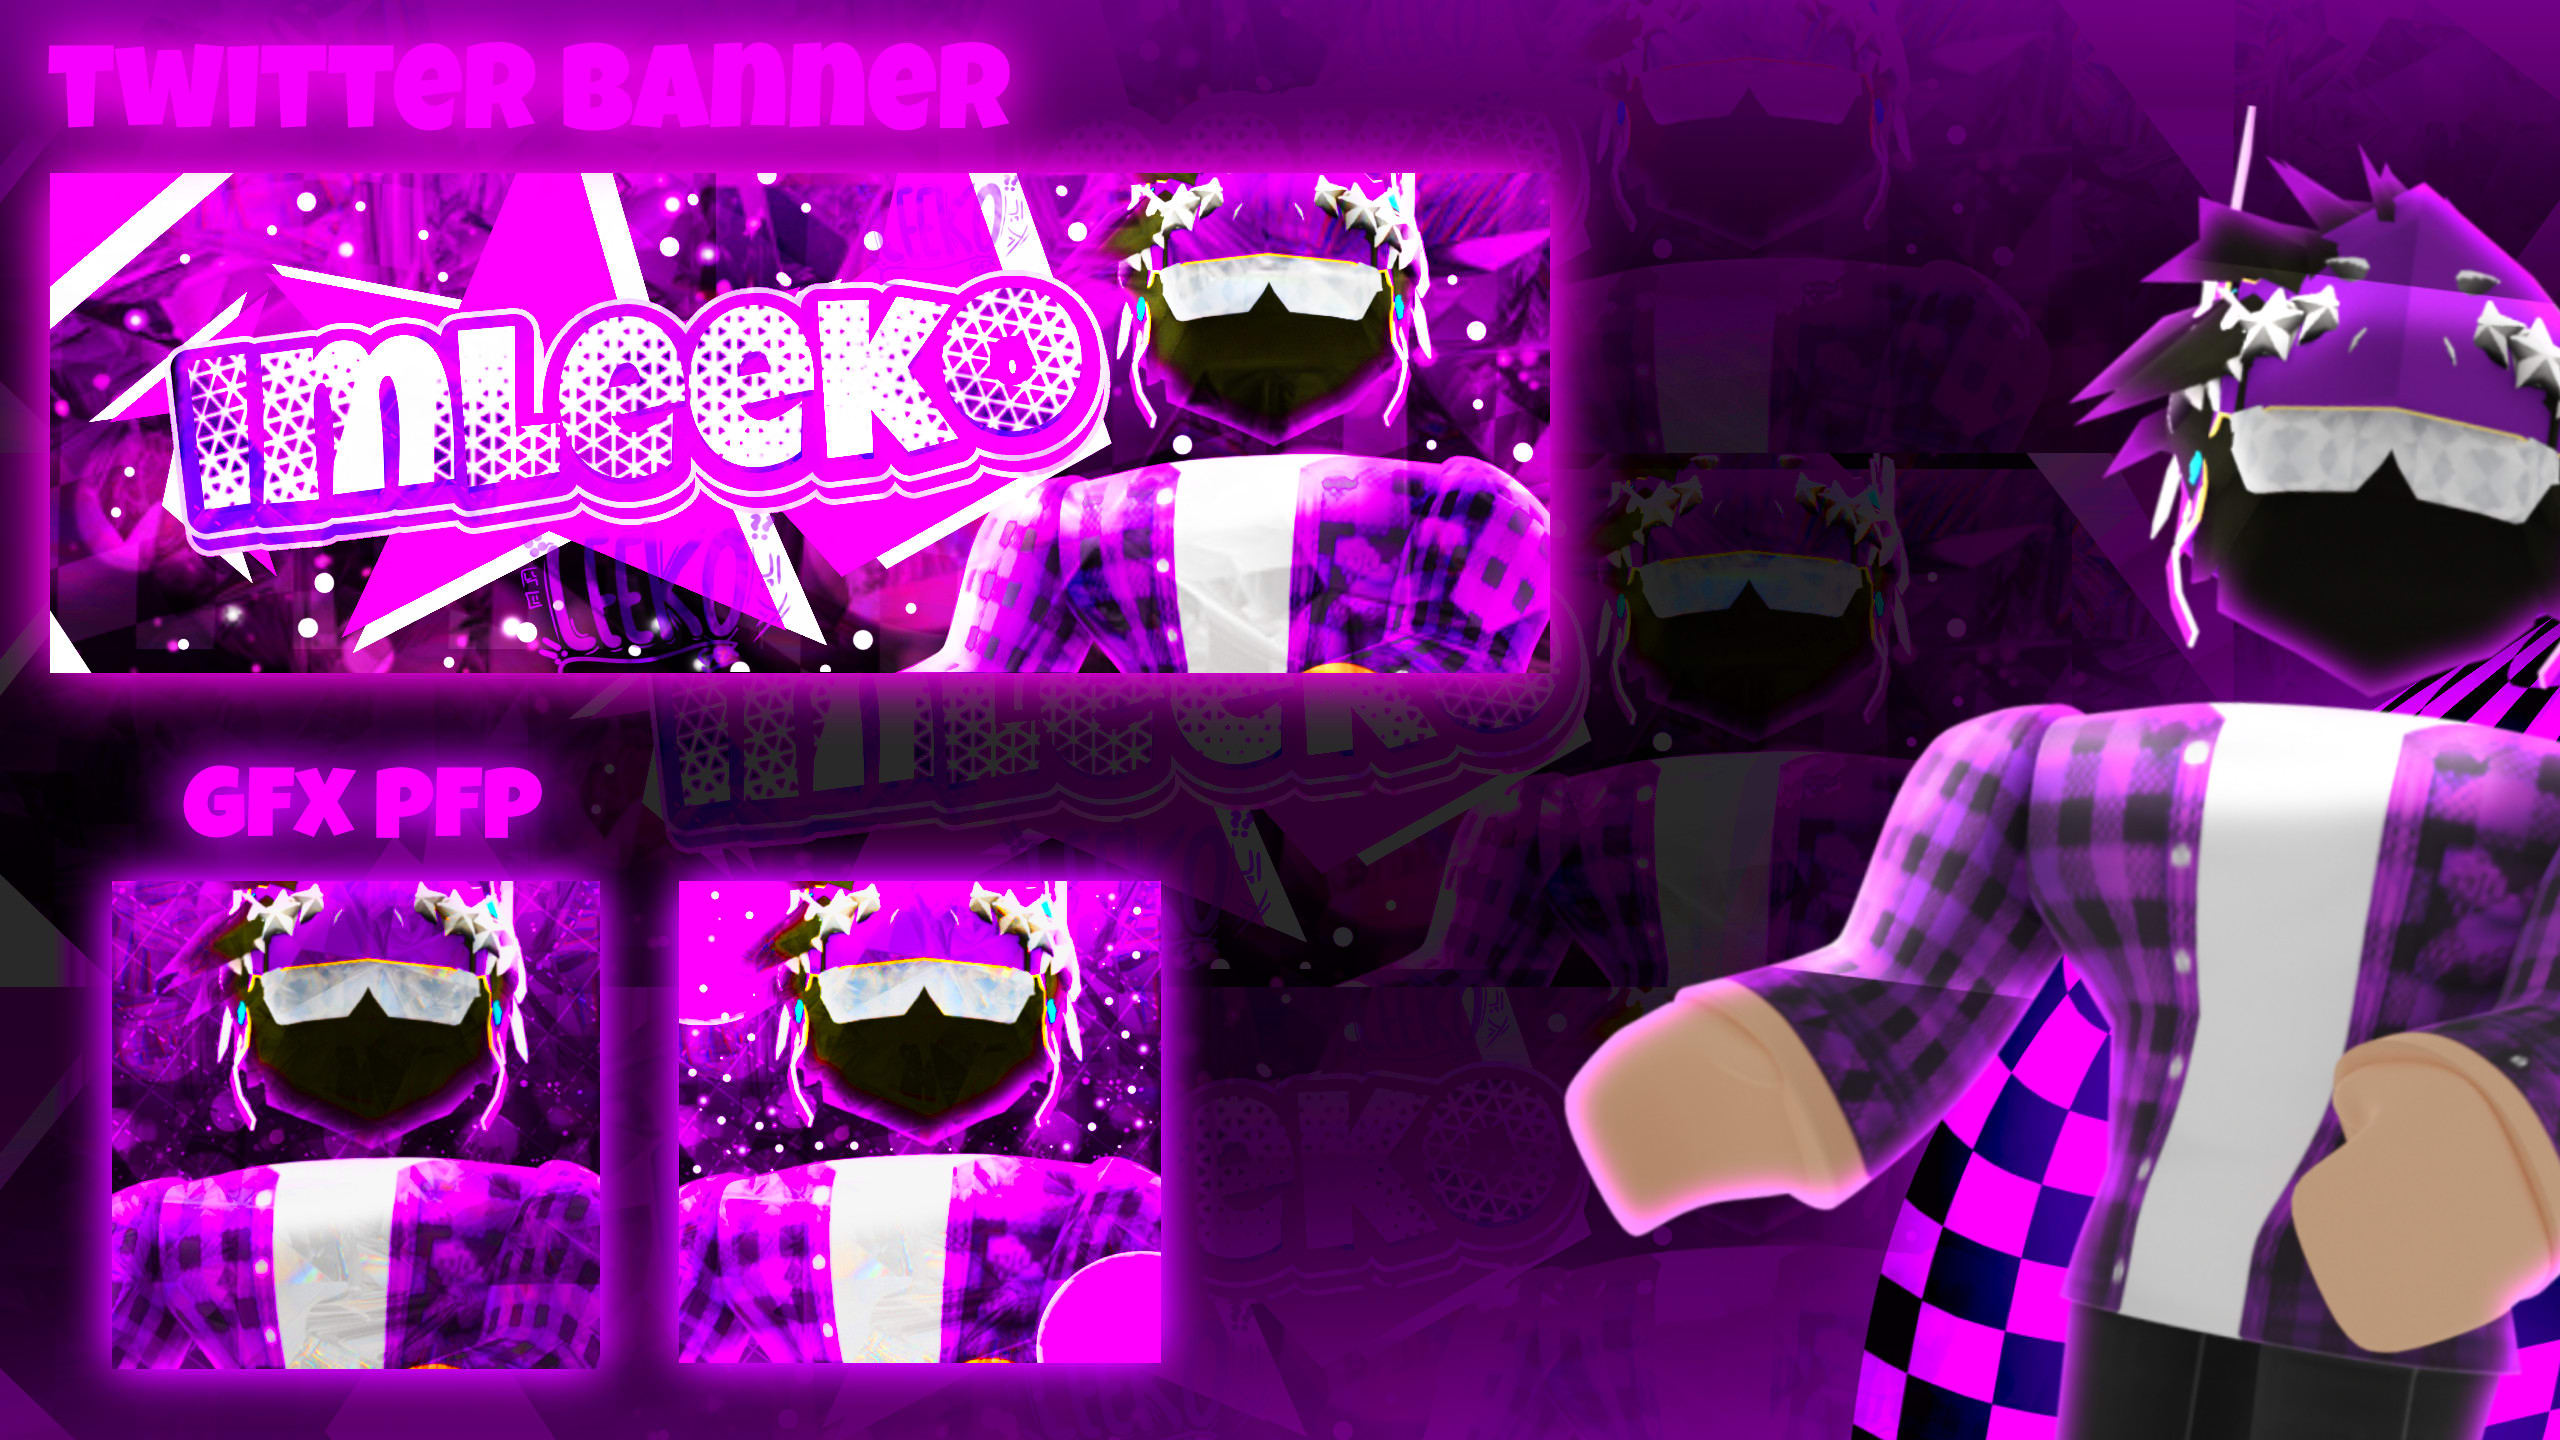 Make you a professional roblox twitter banner by Imleekoyt